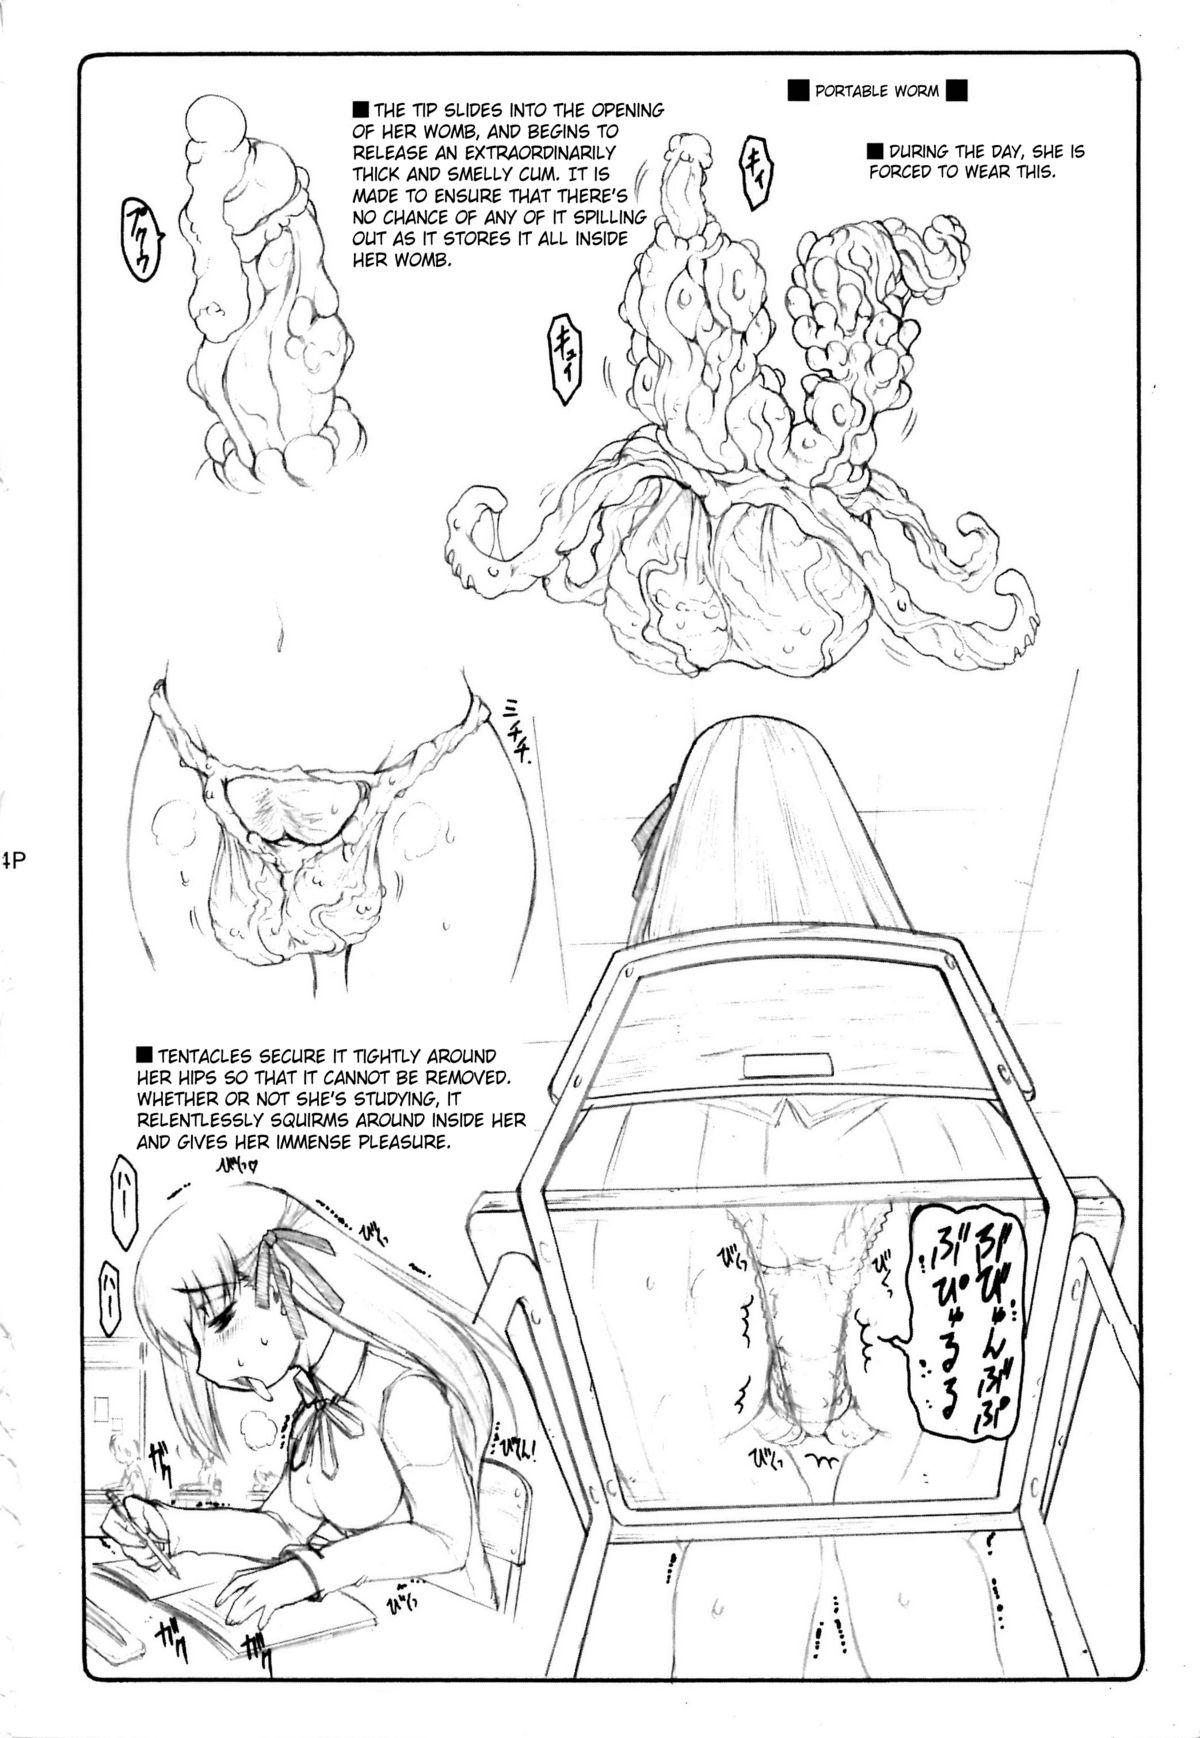 Foda Kotori 4 & 6 Extra Pages - Fate stay night Defloration - Page 6